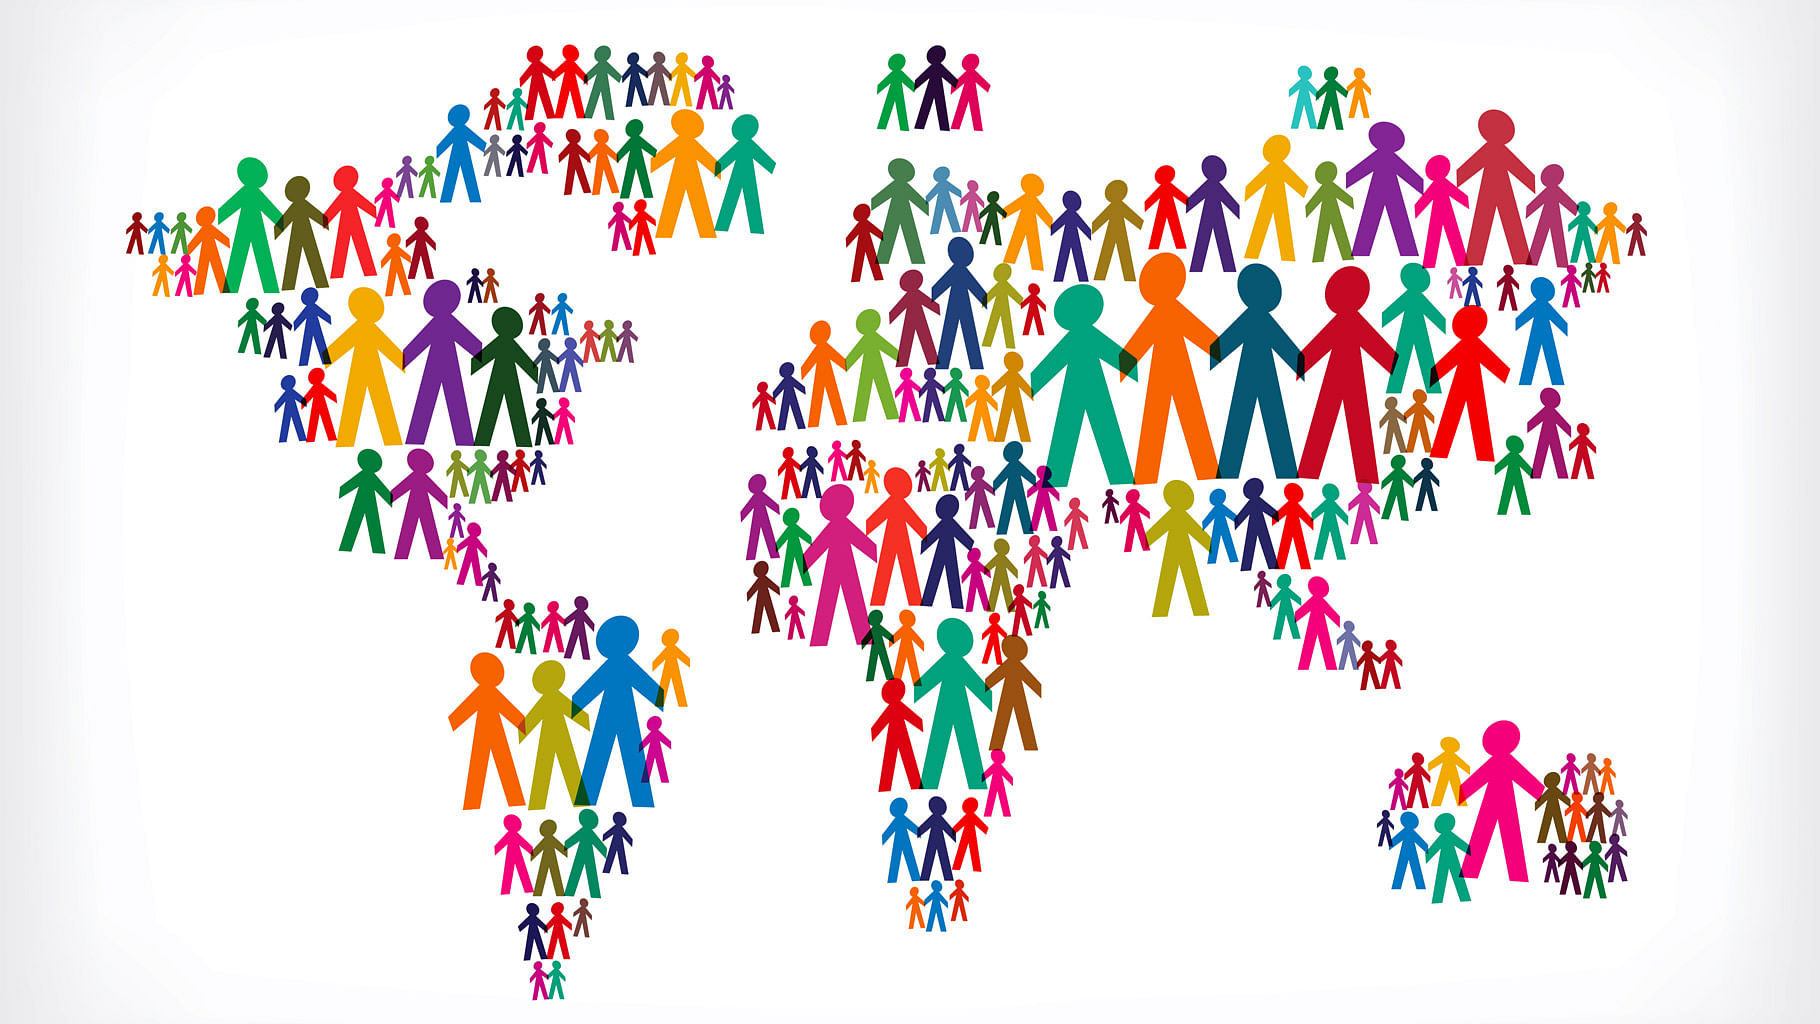 <div class="paragraphs"><p>The world's population is projected to touch 8 billion on 15 November 2022.</p></div>